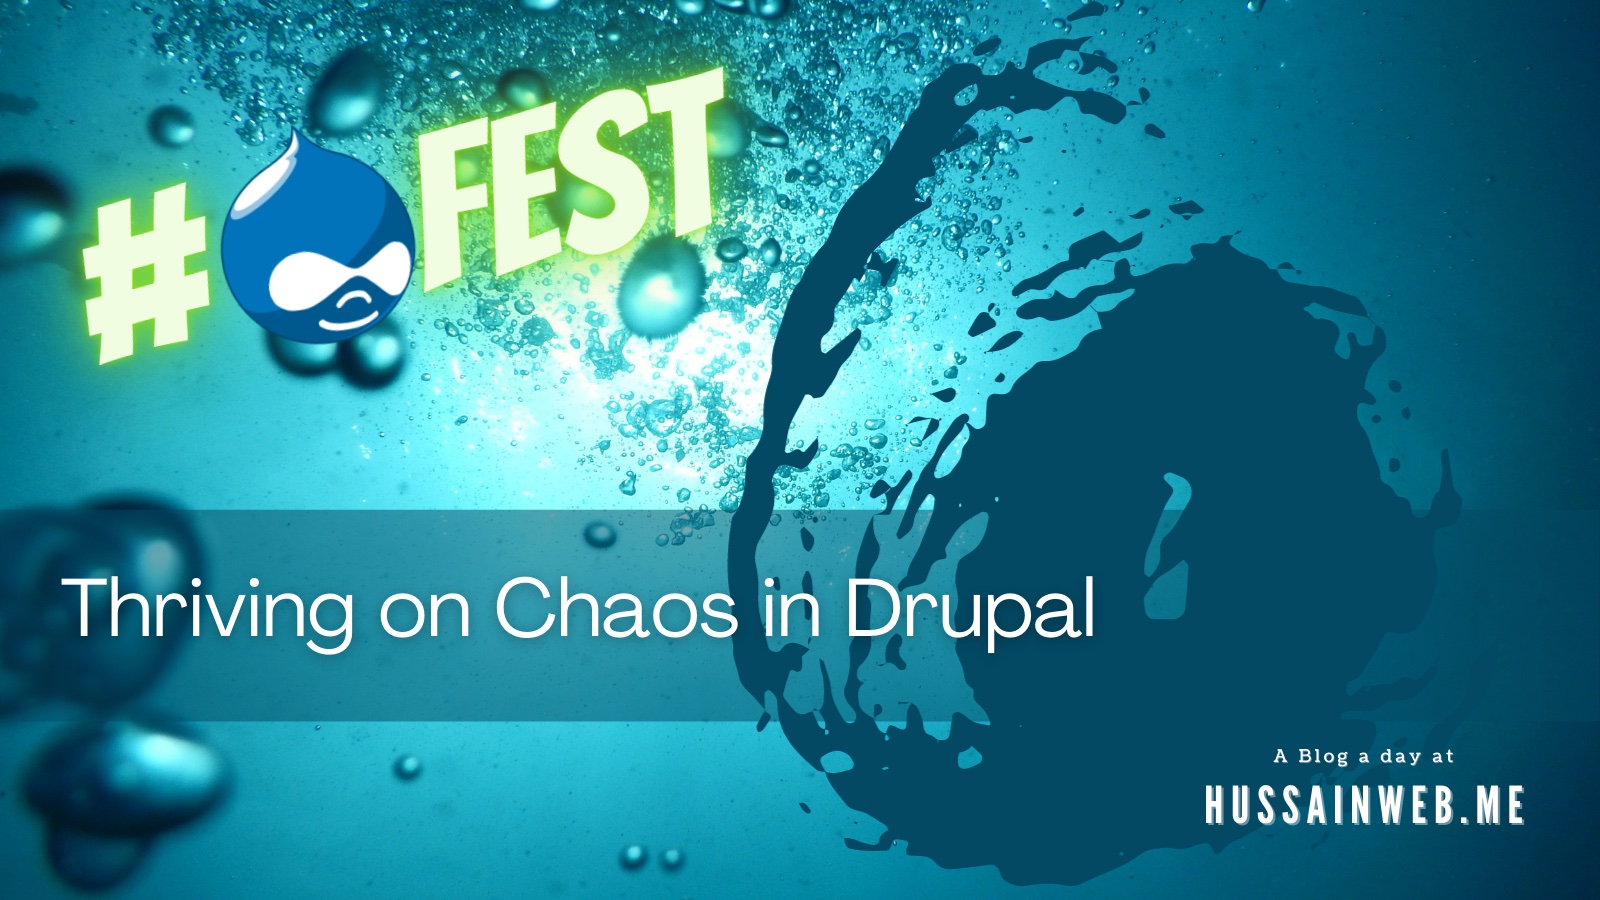 Thriving on Chaos in Drupal